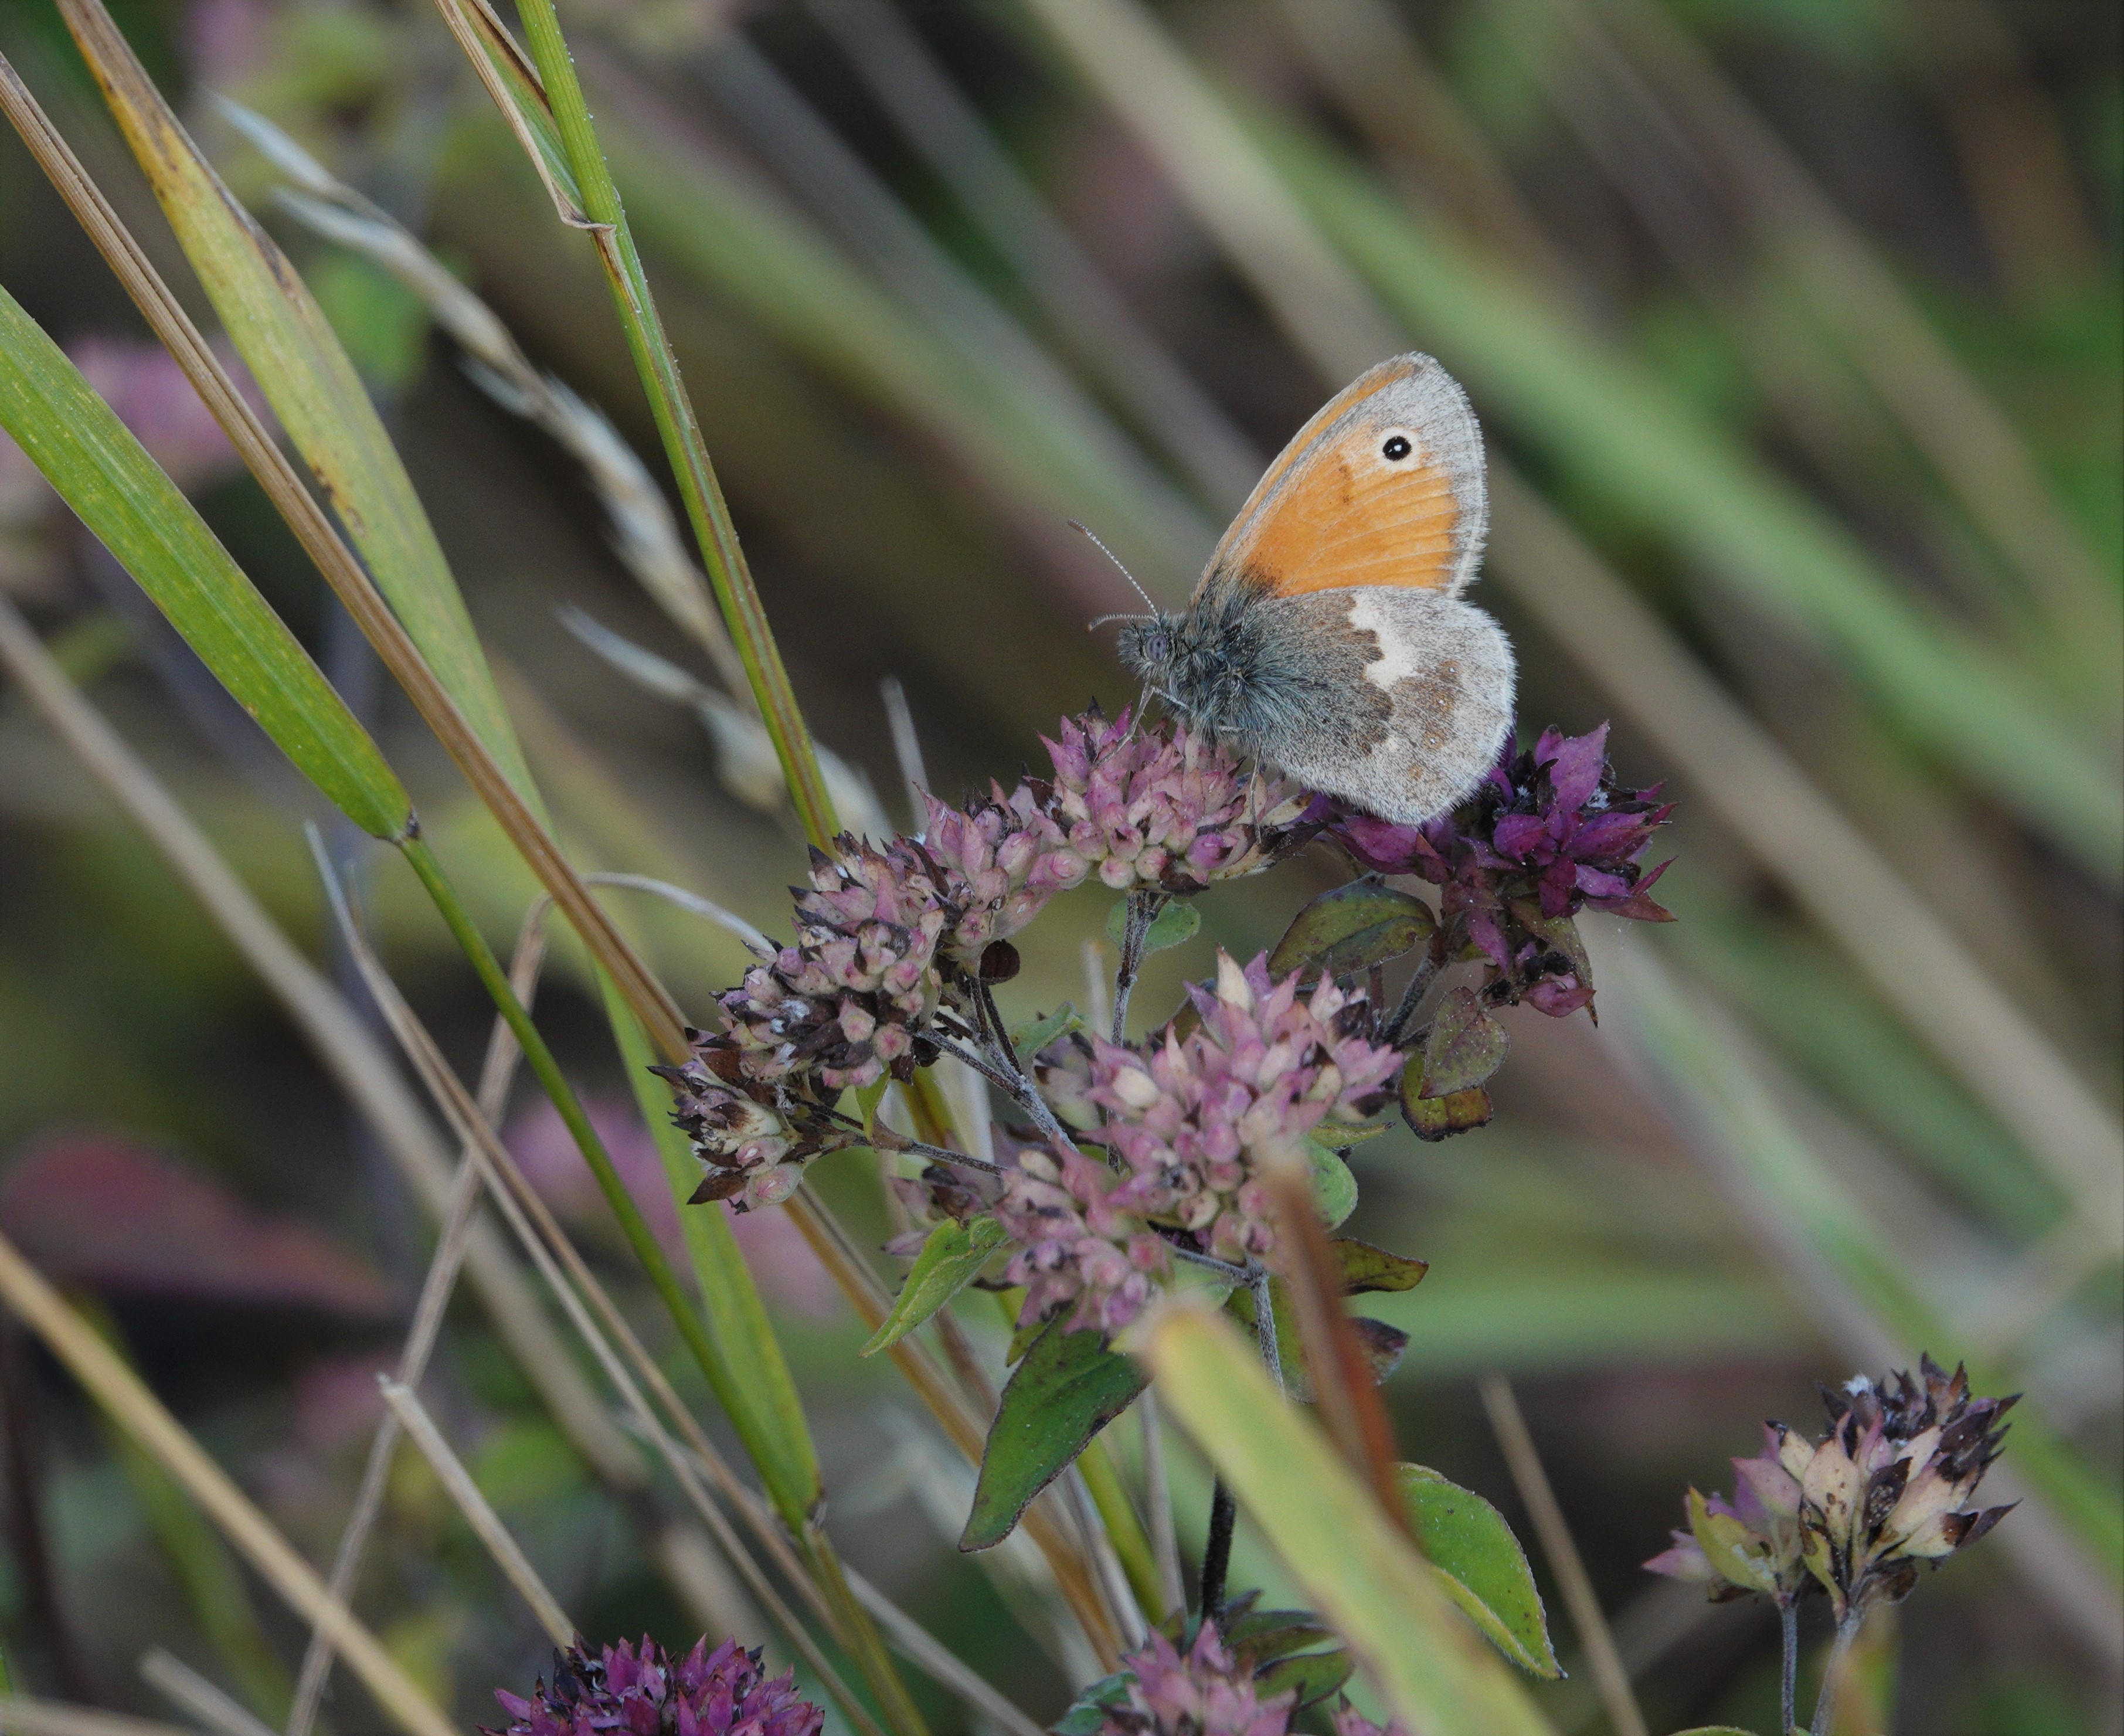 A typical Small Heath with the one spot per forewing